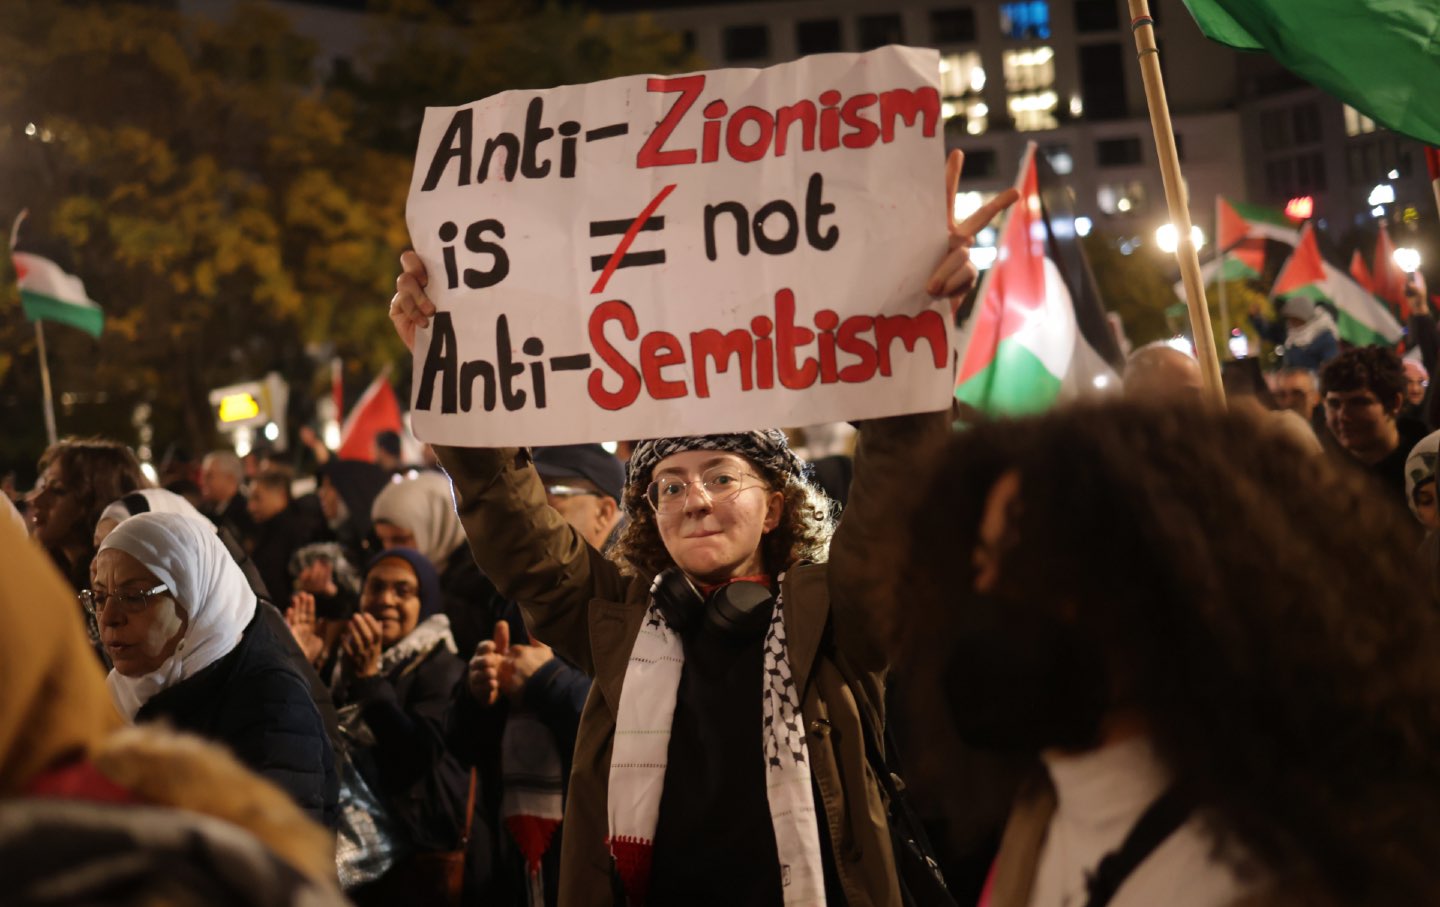 A young person holds a sign that reads “Anti-Zionism is not Anti-Semitism” during a “Freedom for Palestine” protest march that drew thousands of participants on November 4, 2023, in Berlin, Germany.